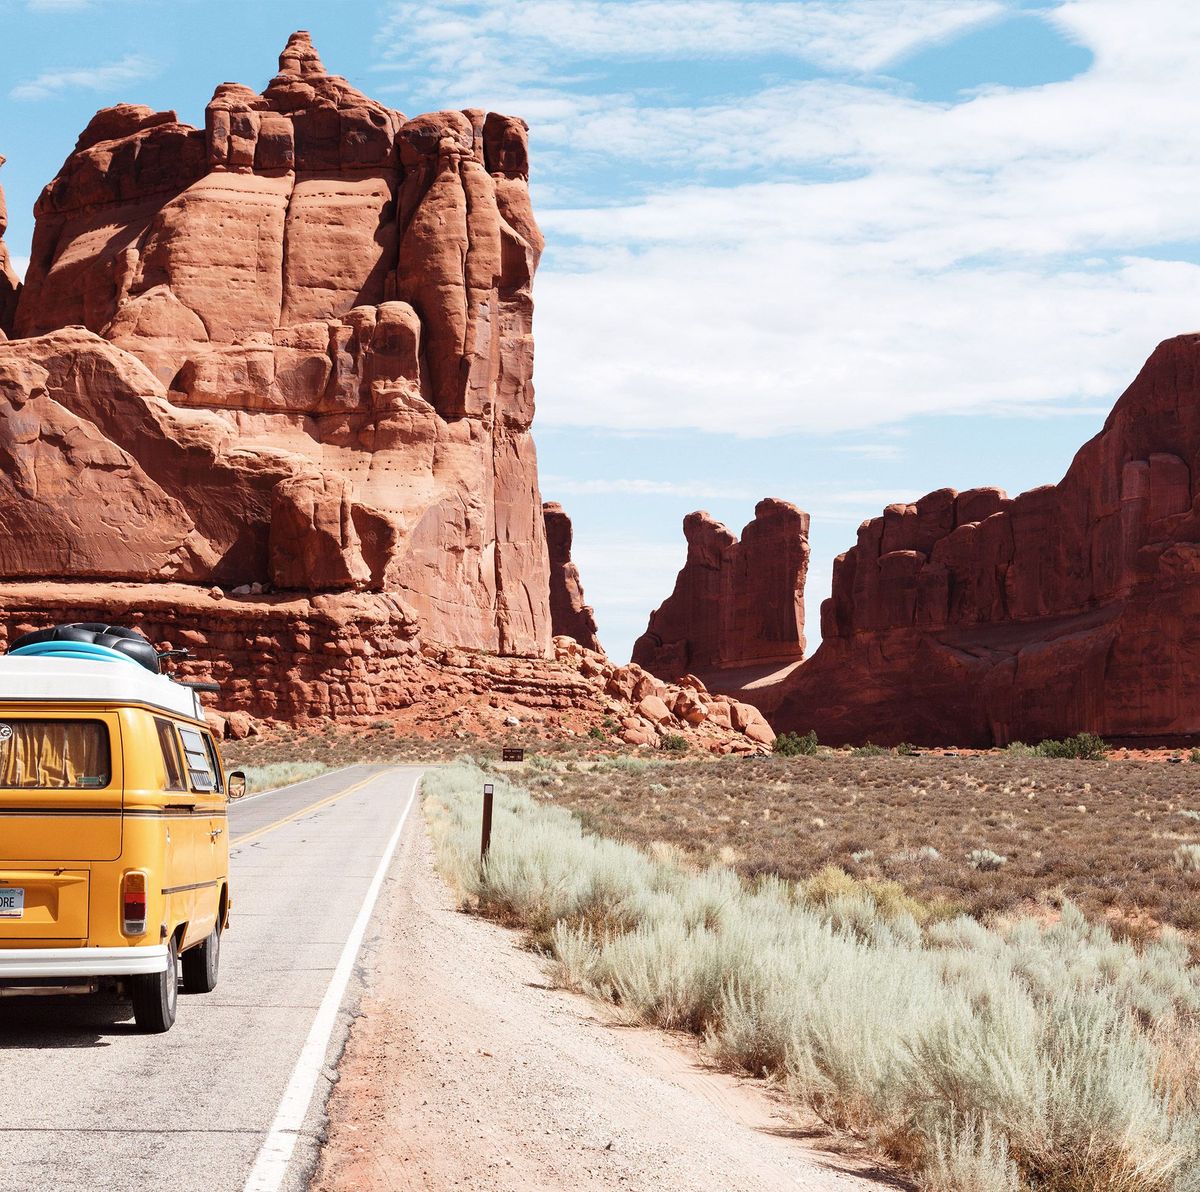 Road Trip Essentials: All the Gear You Need for a Long Drive